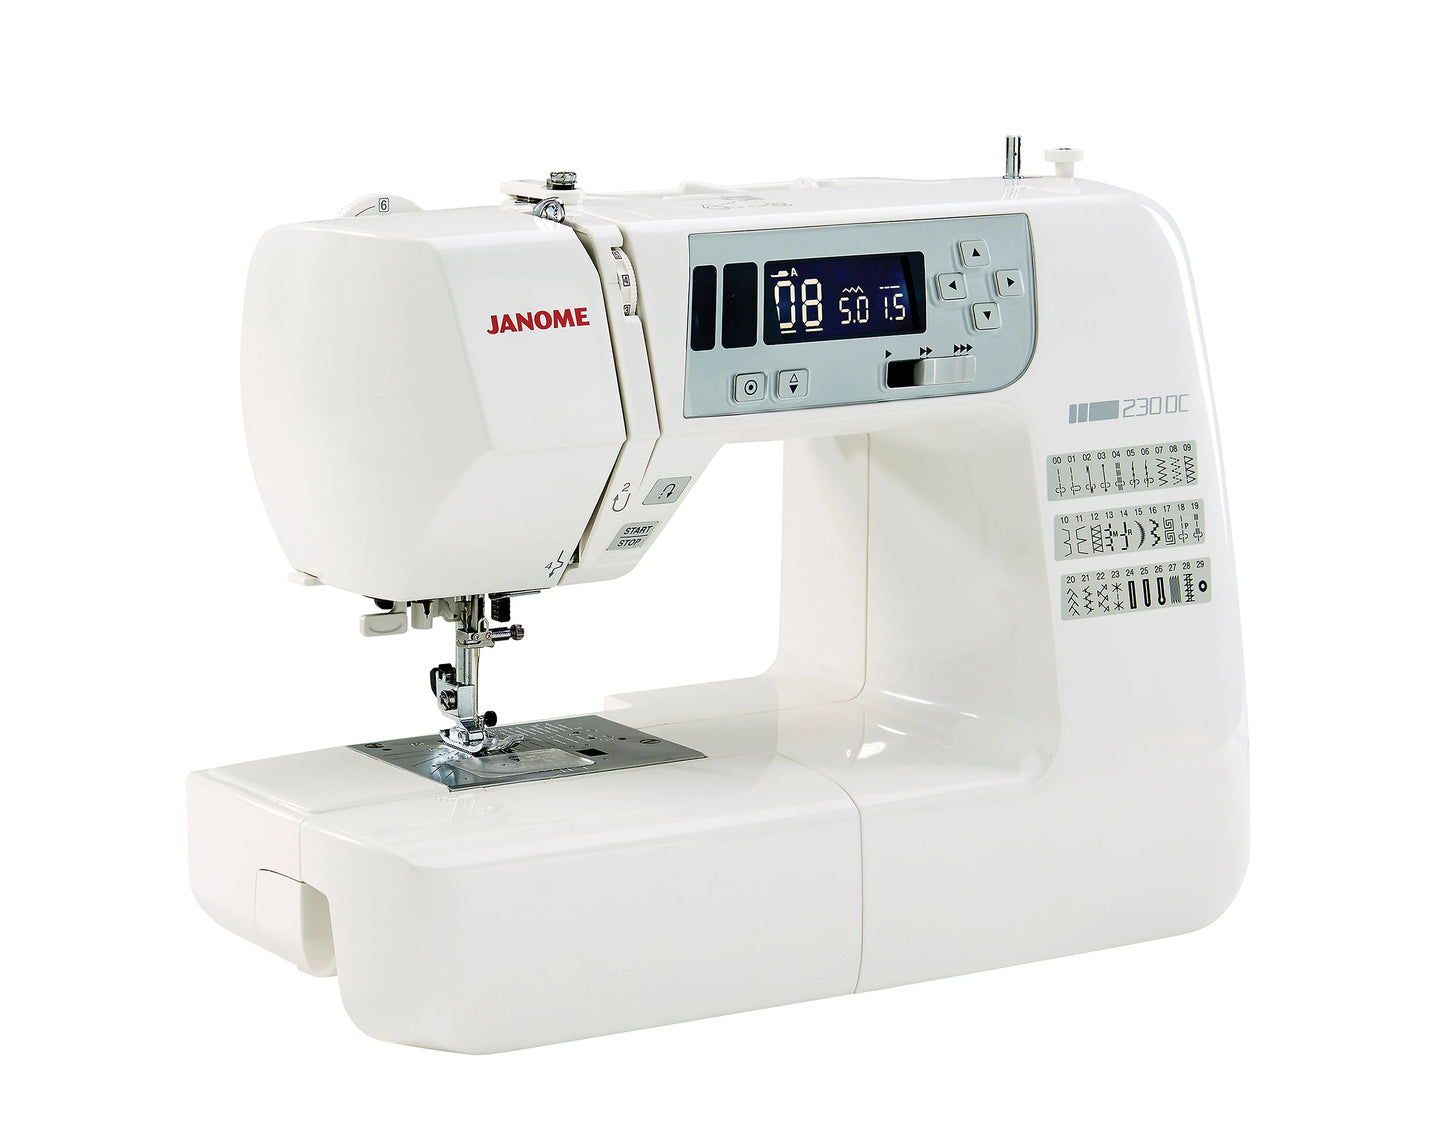 Janome Model 230DC - Easy To Use Sewing Machine ***SALE***